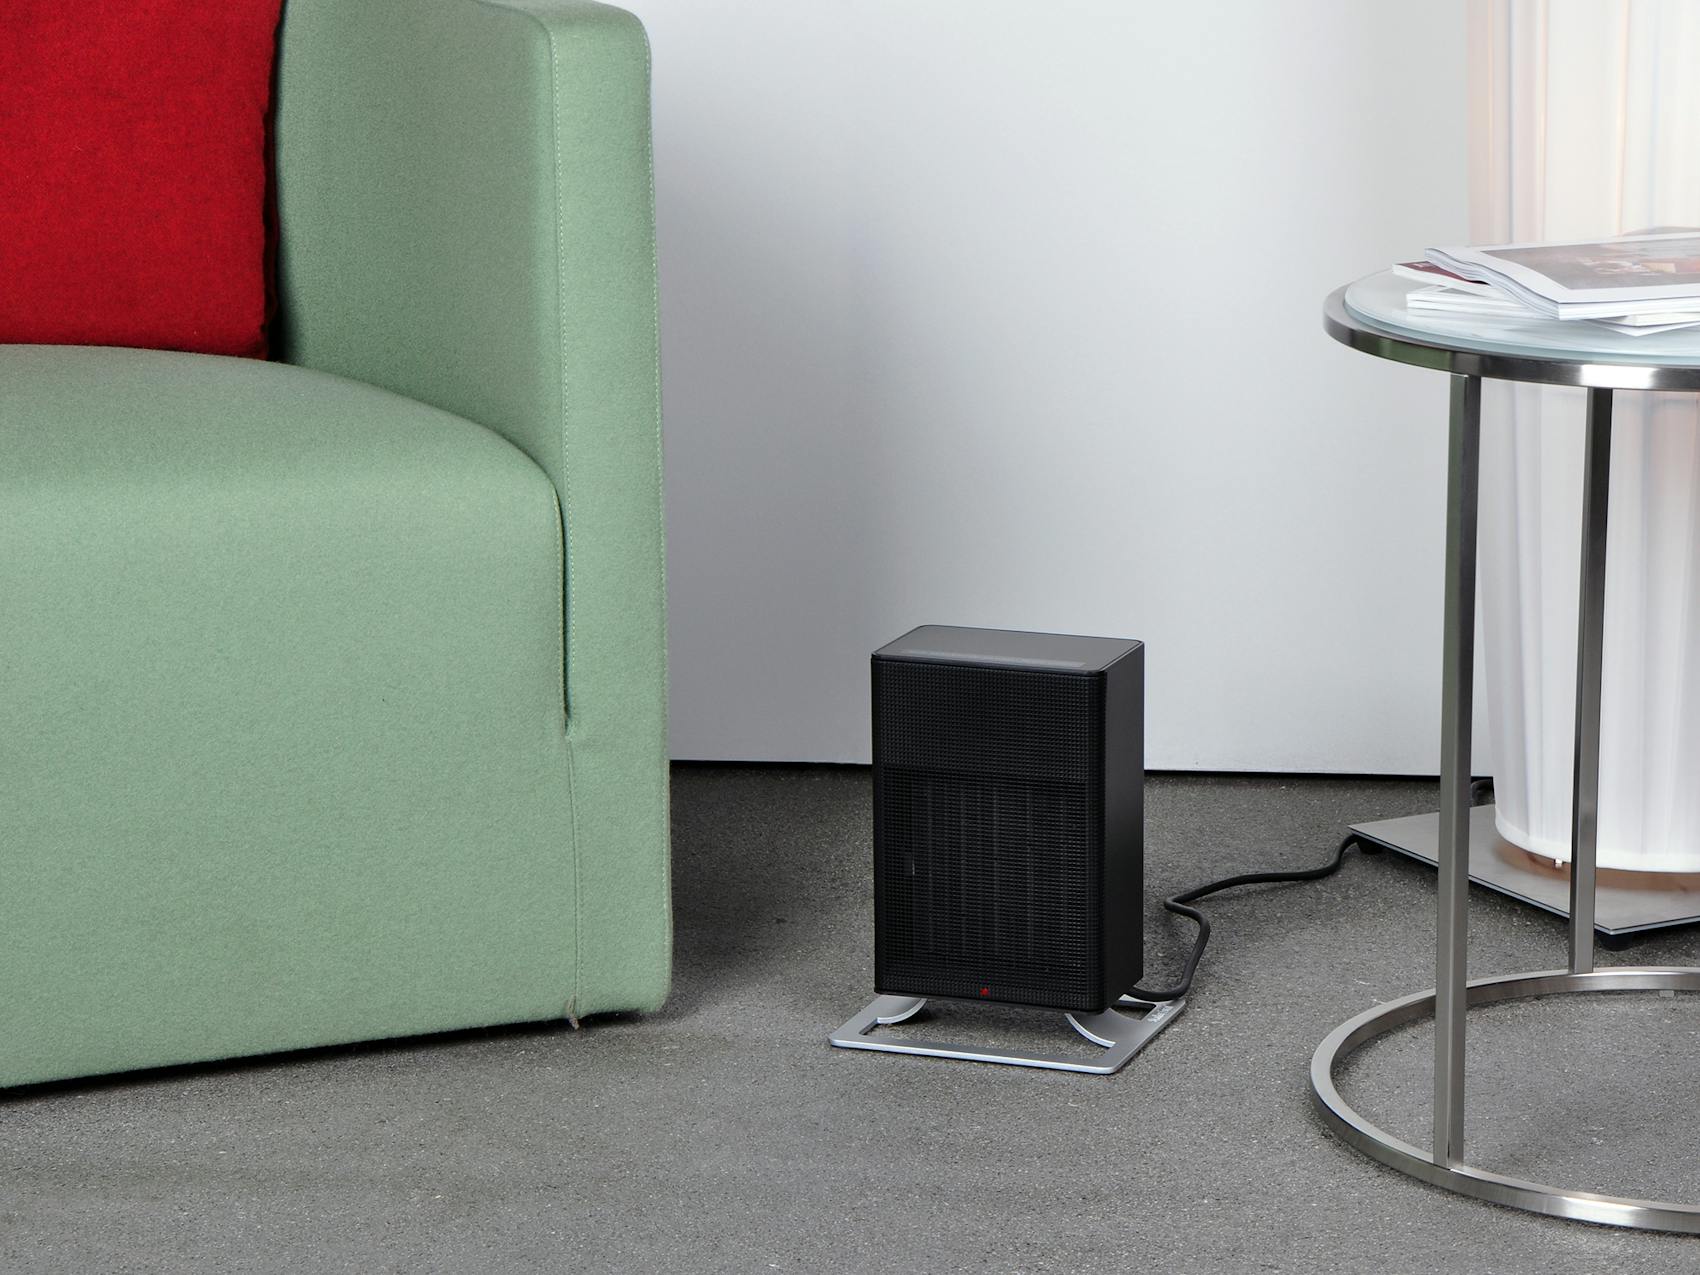 Anna little heater by Stadler Form in black in a living room